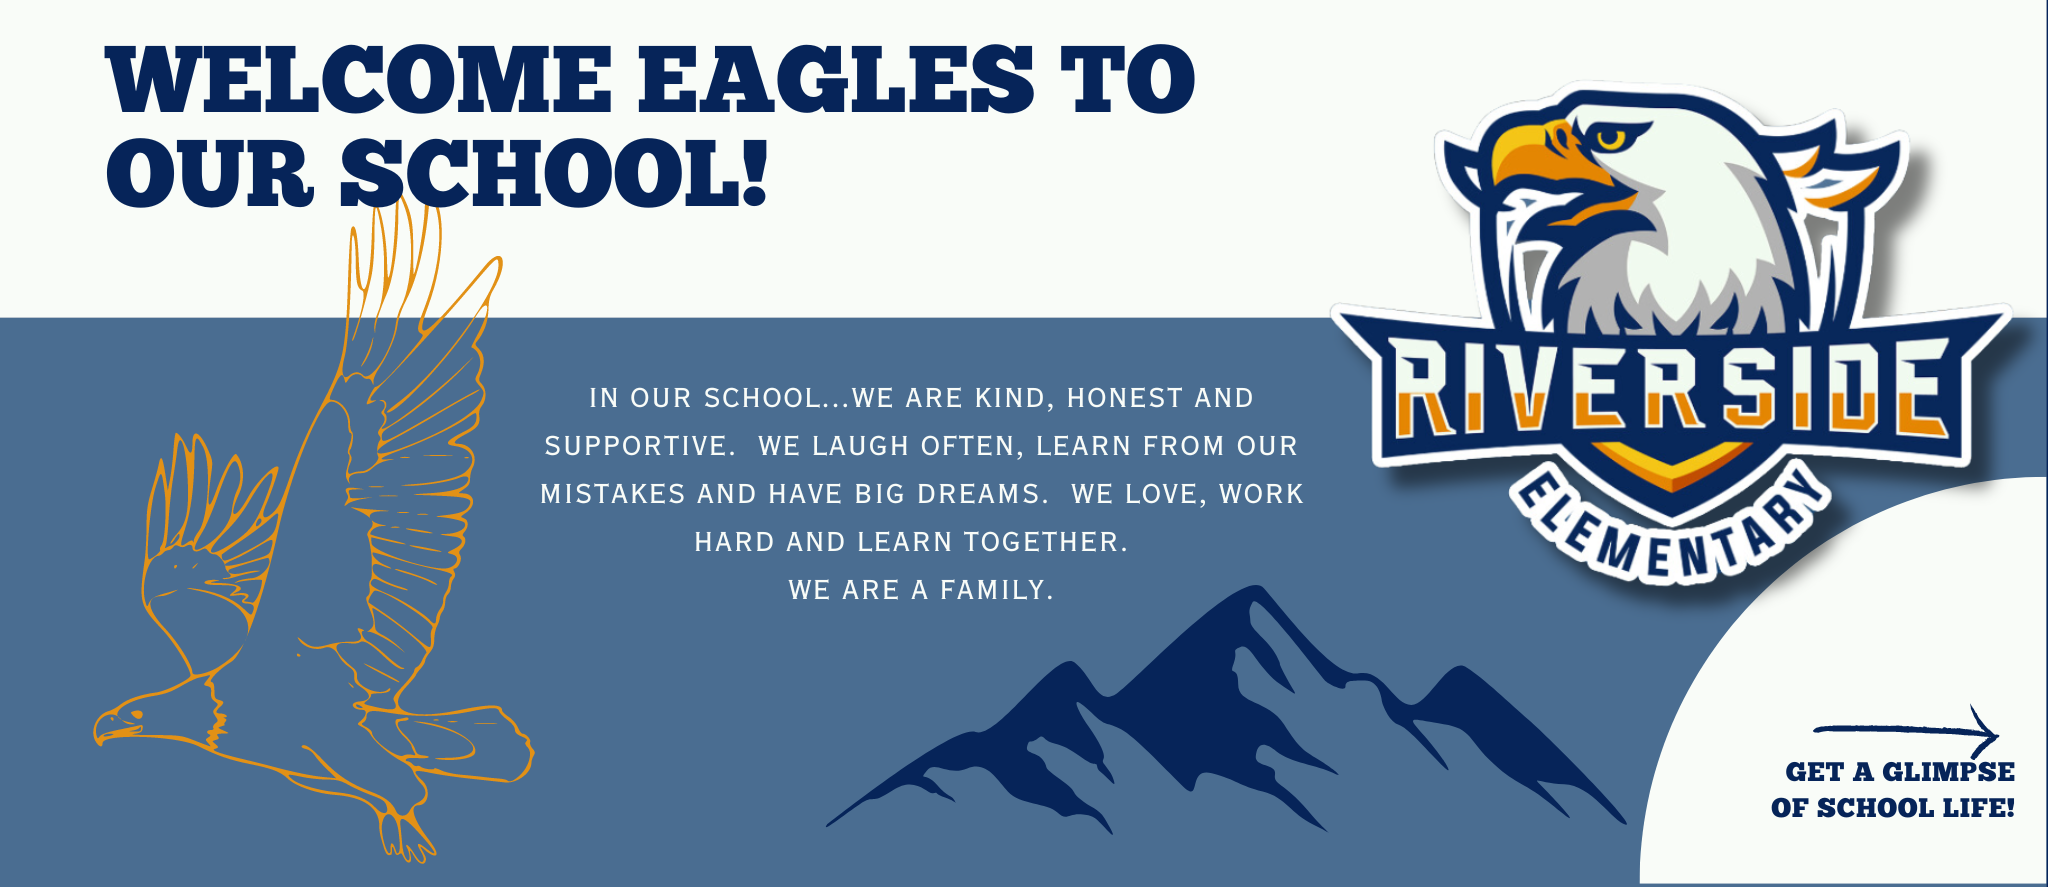 Welcome Eagles to our school!